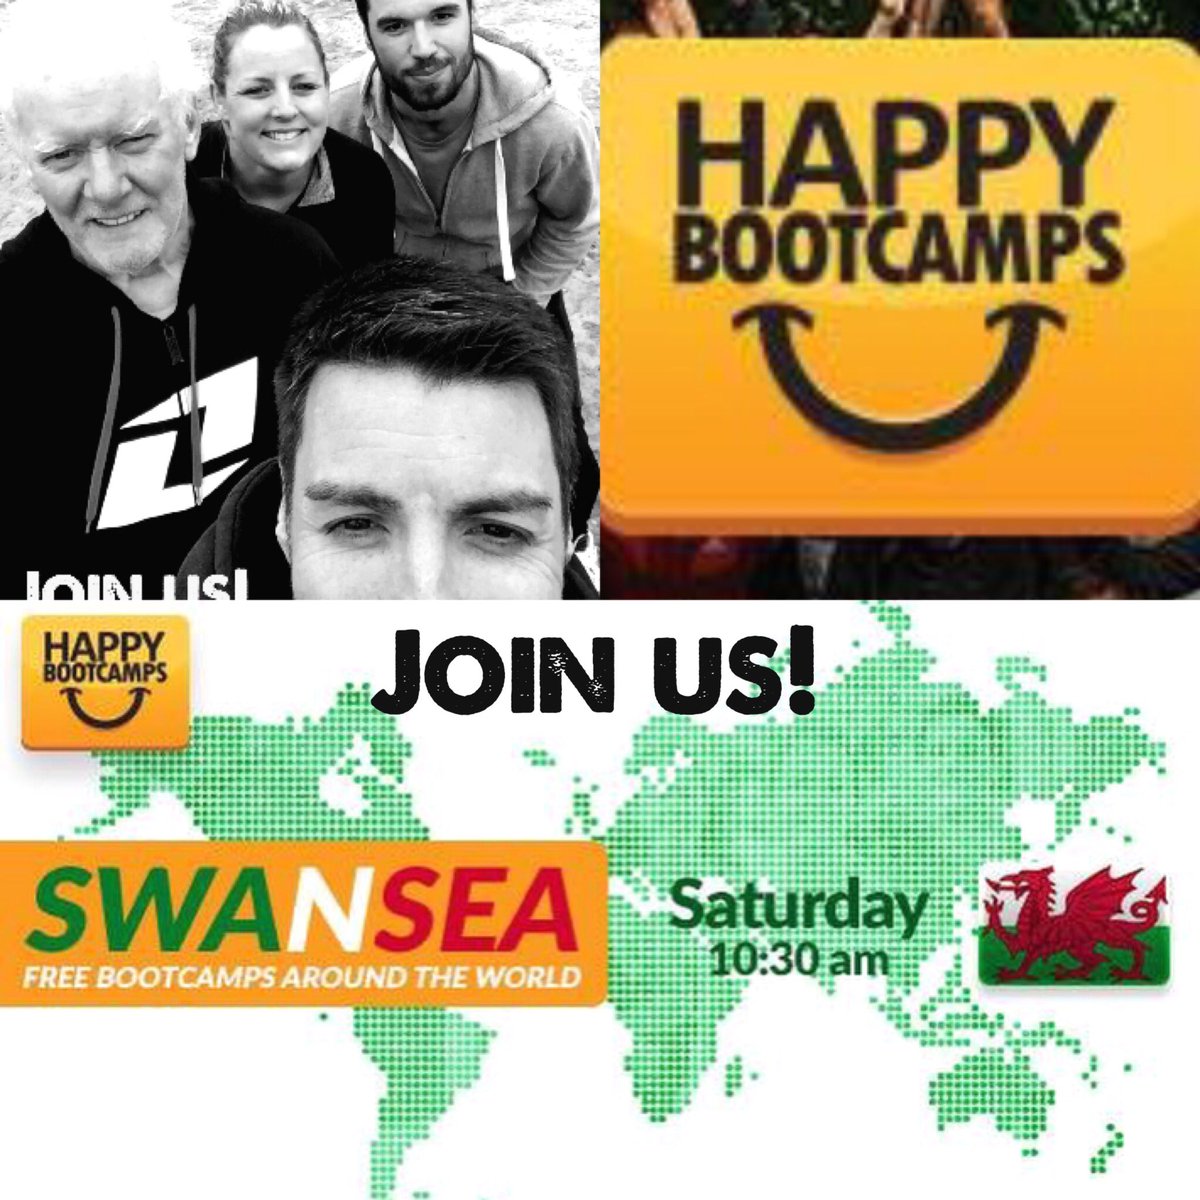 Free Bootcamp!
Register here:
happybootcamps.com/members
@transformwithus @happybootcamps 
#Swansea #fitness #free